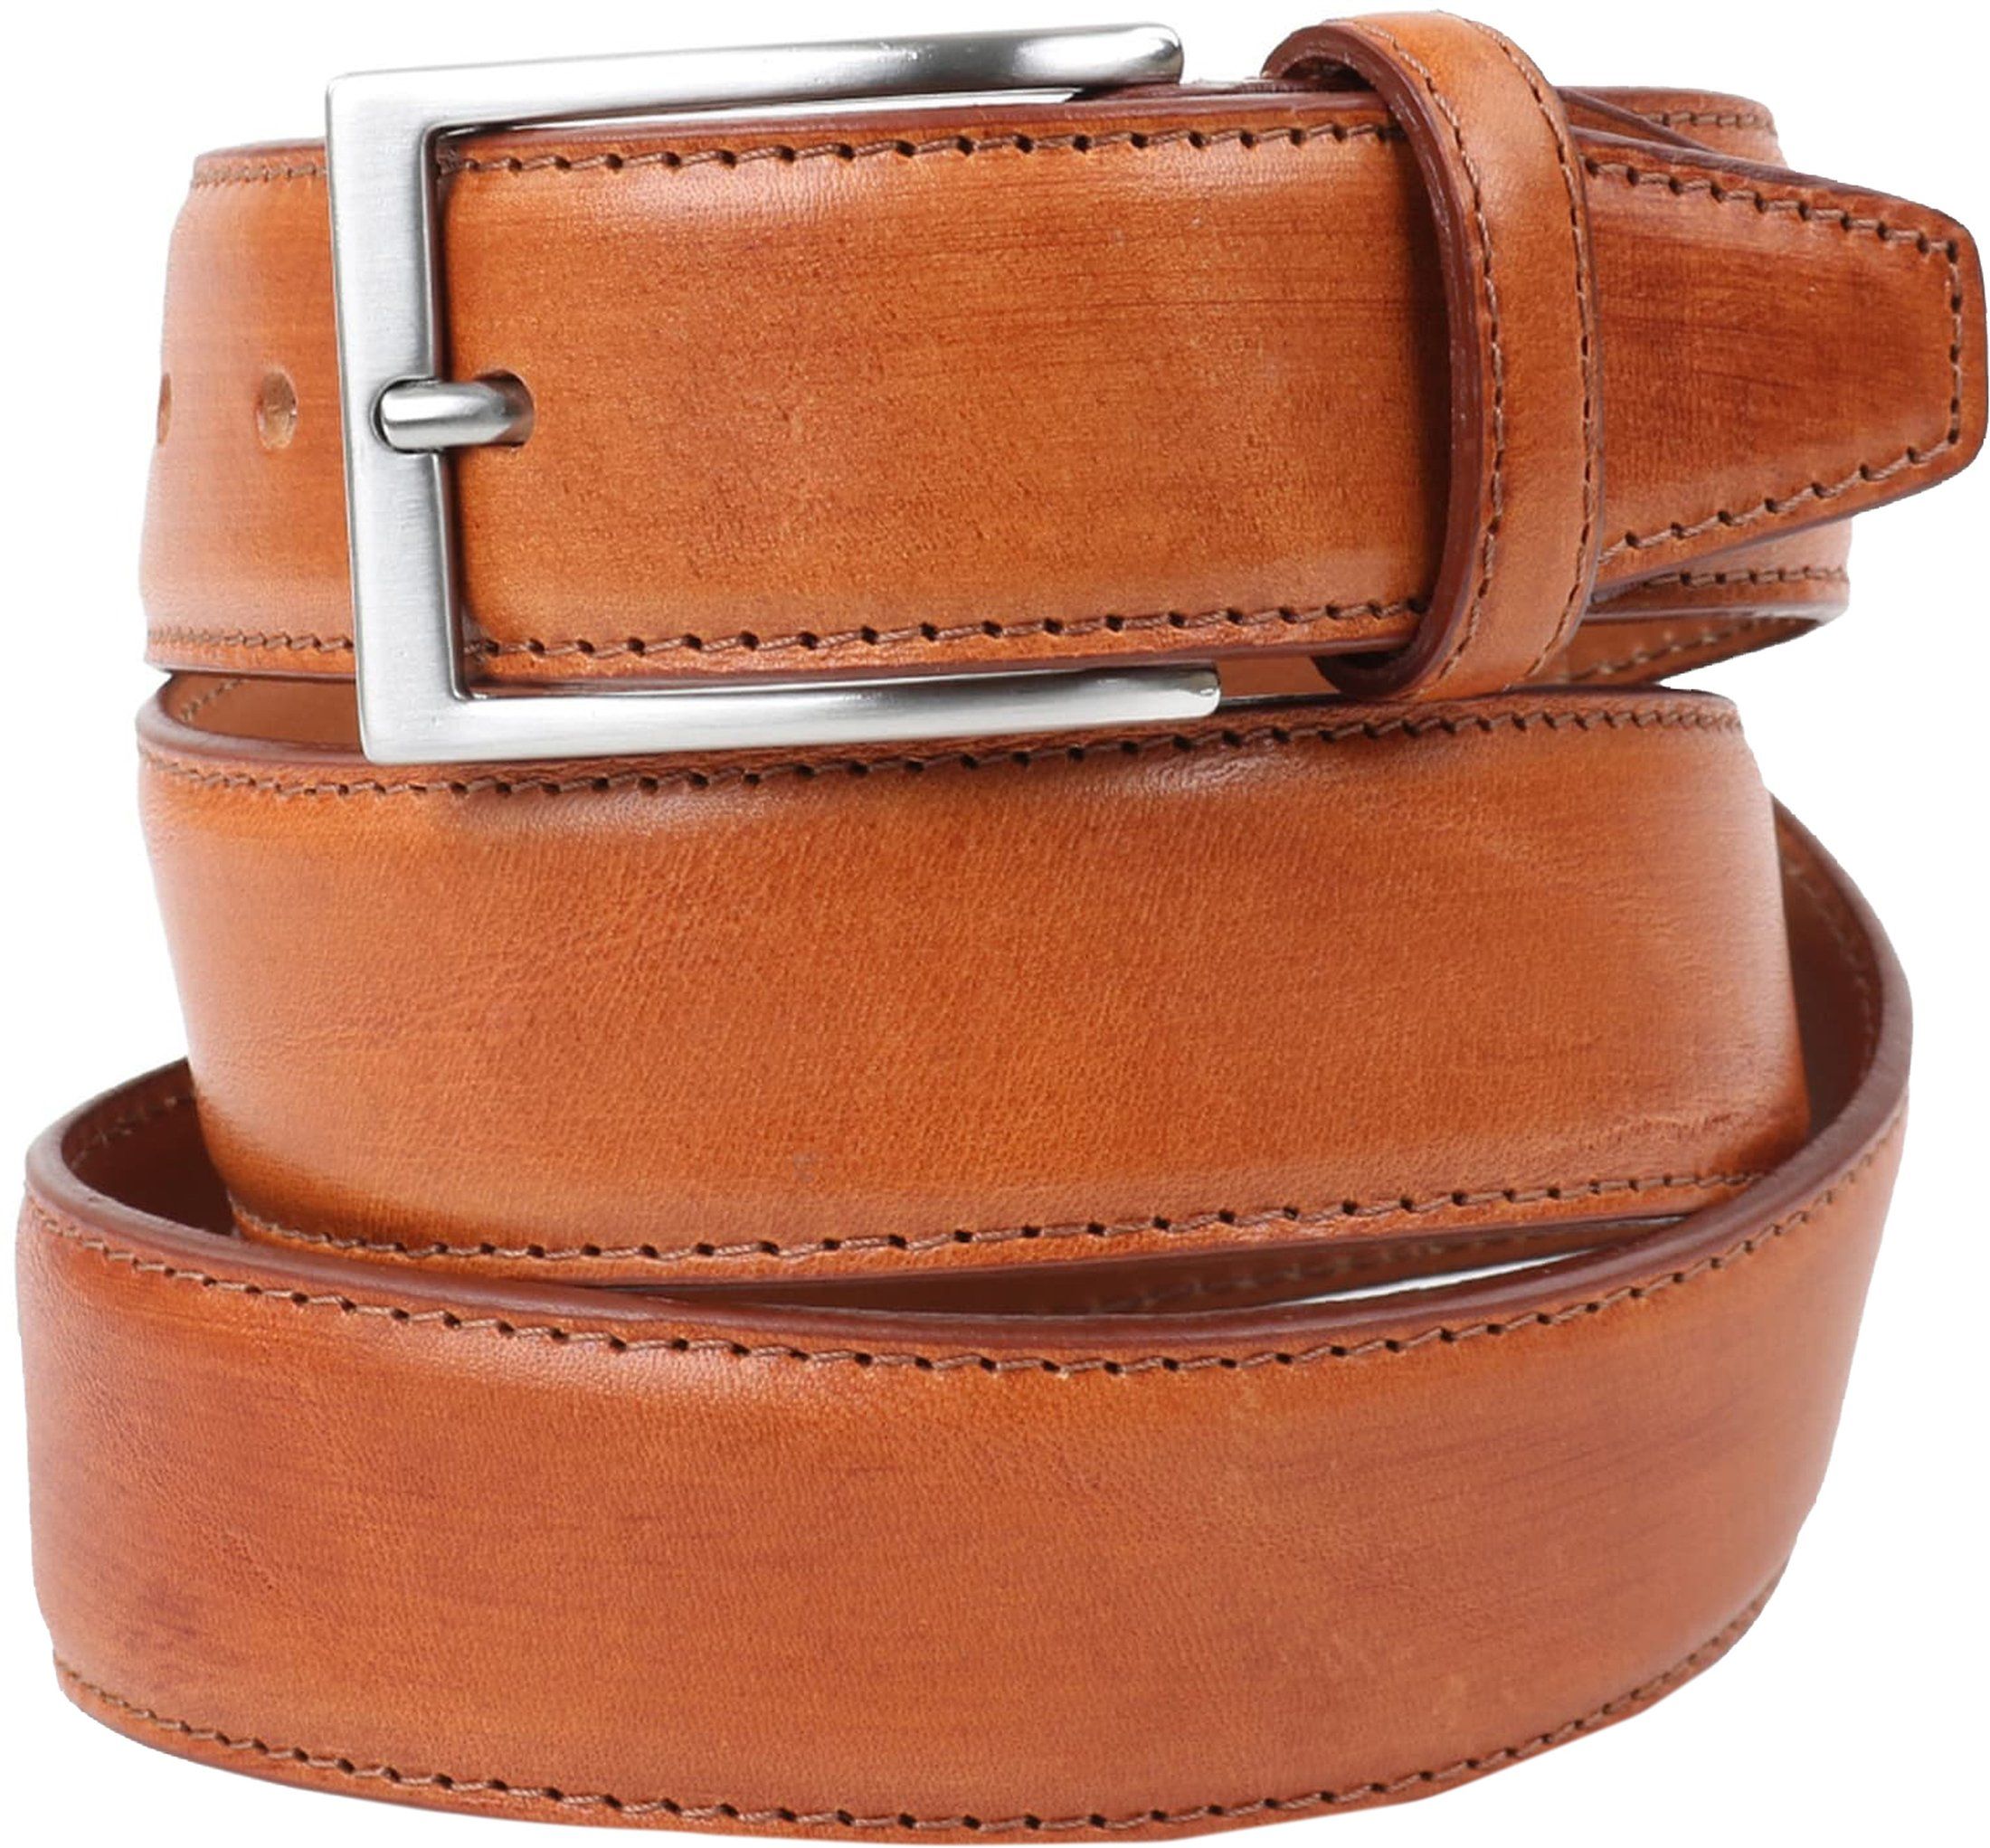 Profuomo Leather Belt Cognac Brown size 45.3